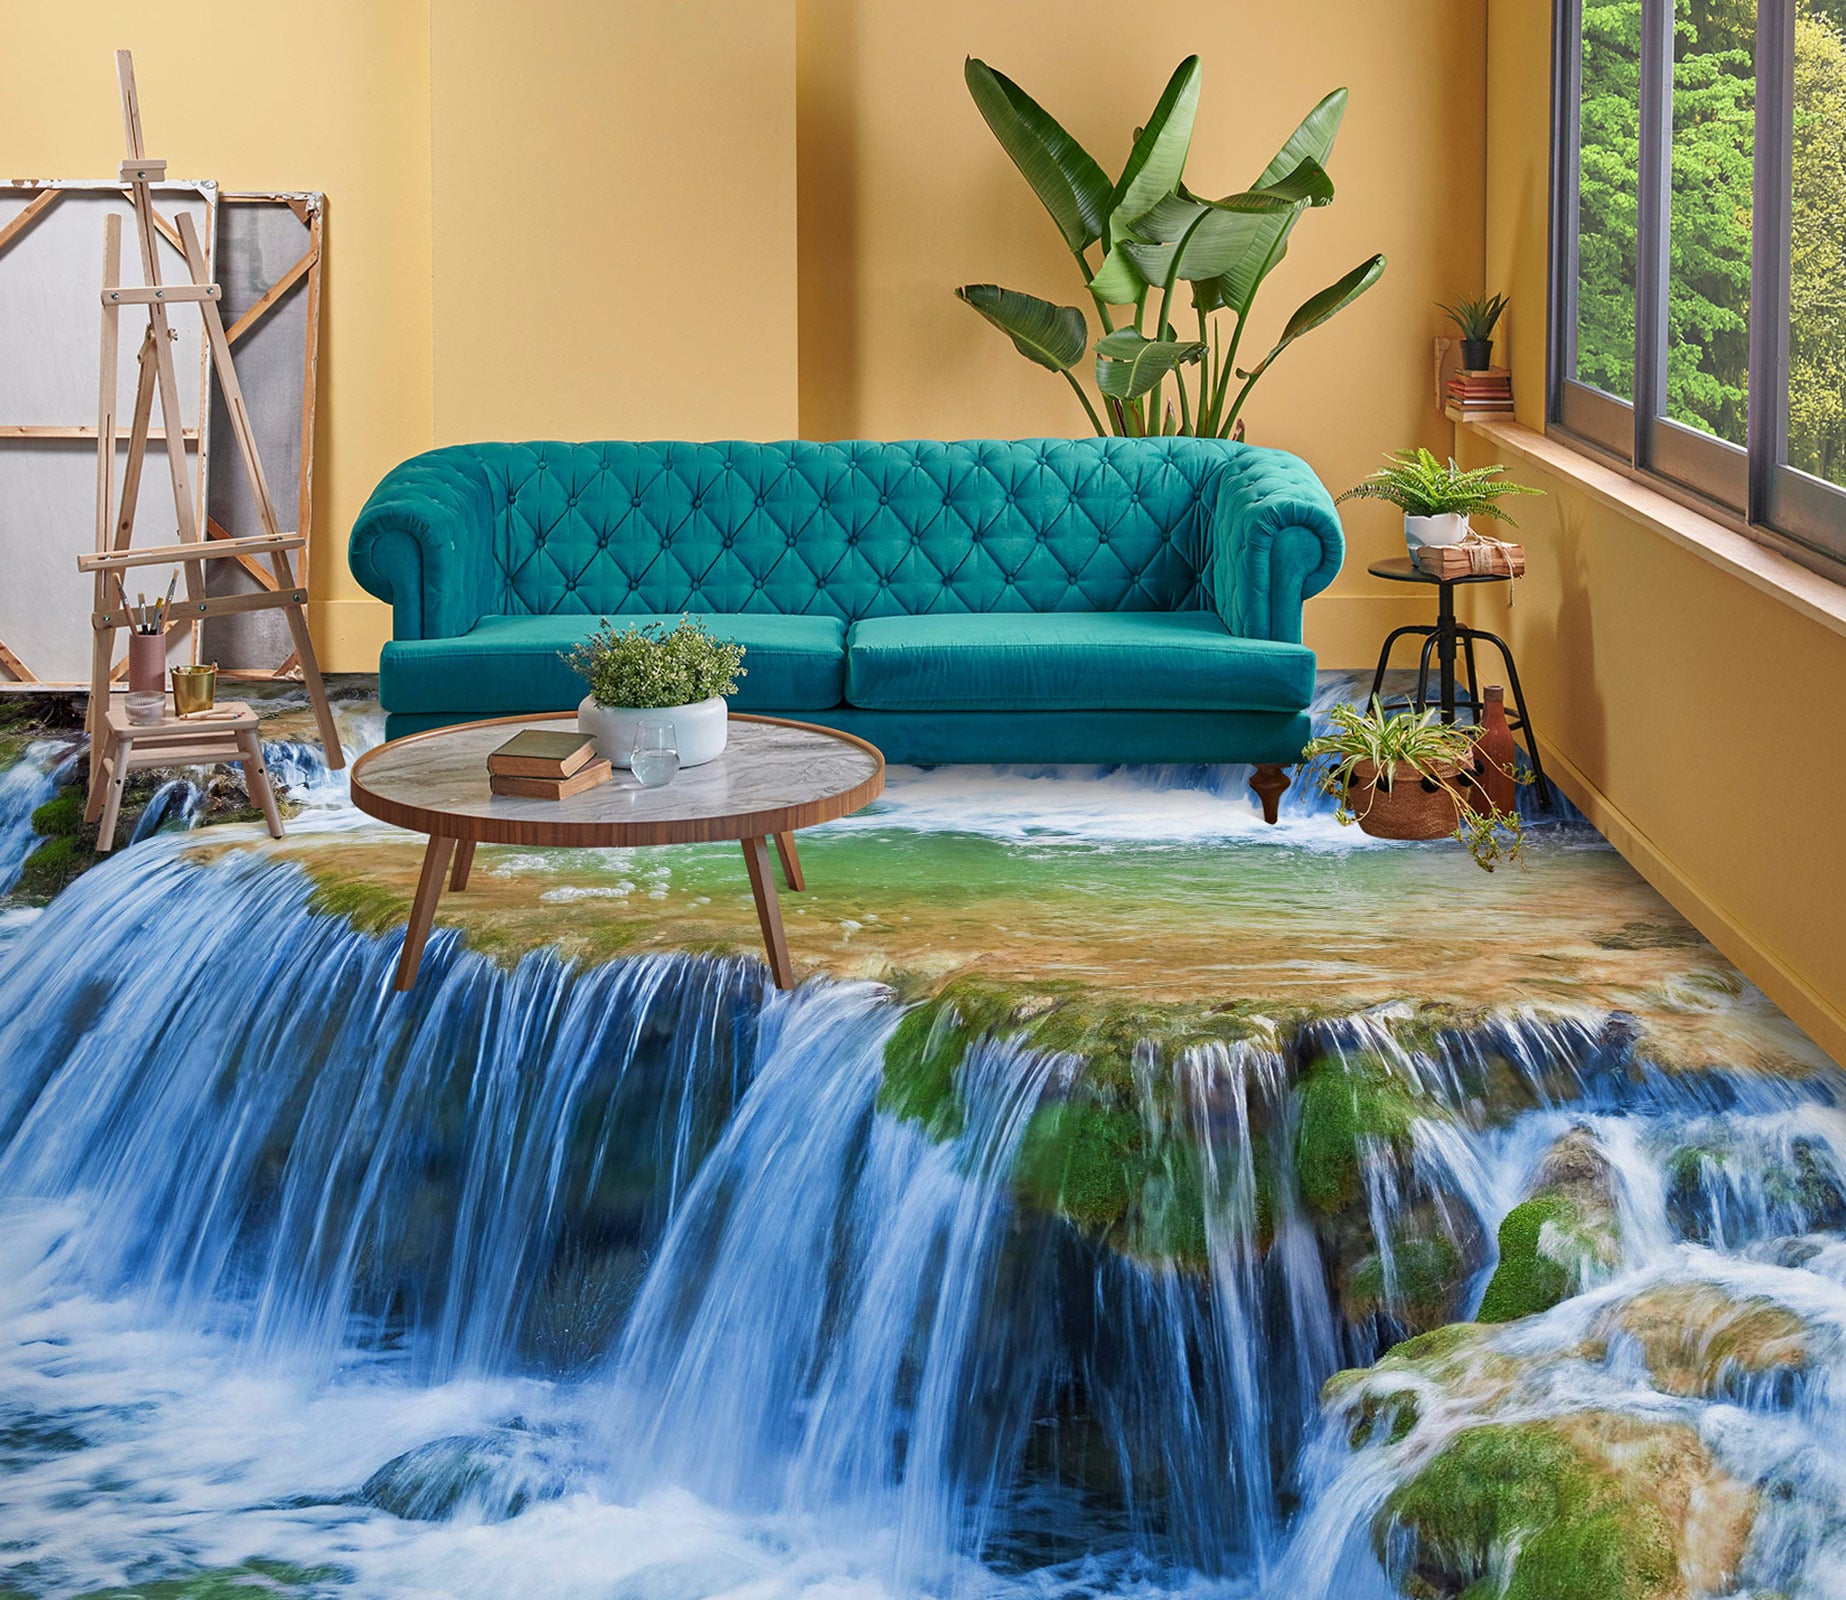 3D Small Blue Waterfall 1008 Floor Mural  Wallpaper Murals Self-Adhesive Removable Print Epoxy